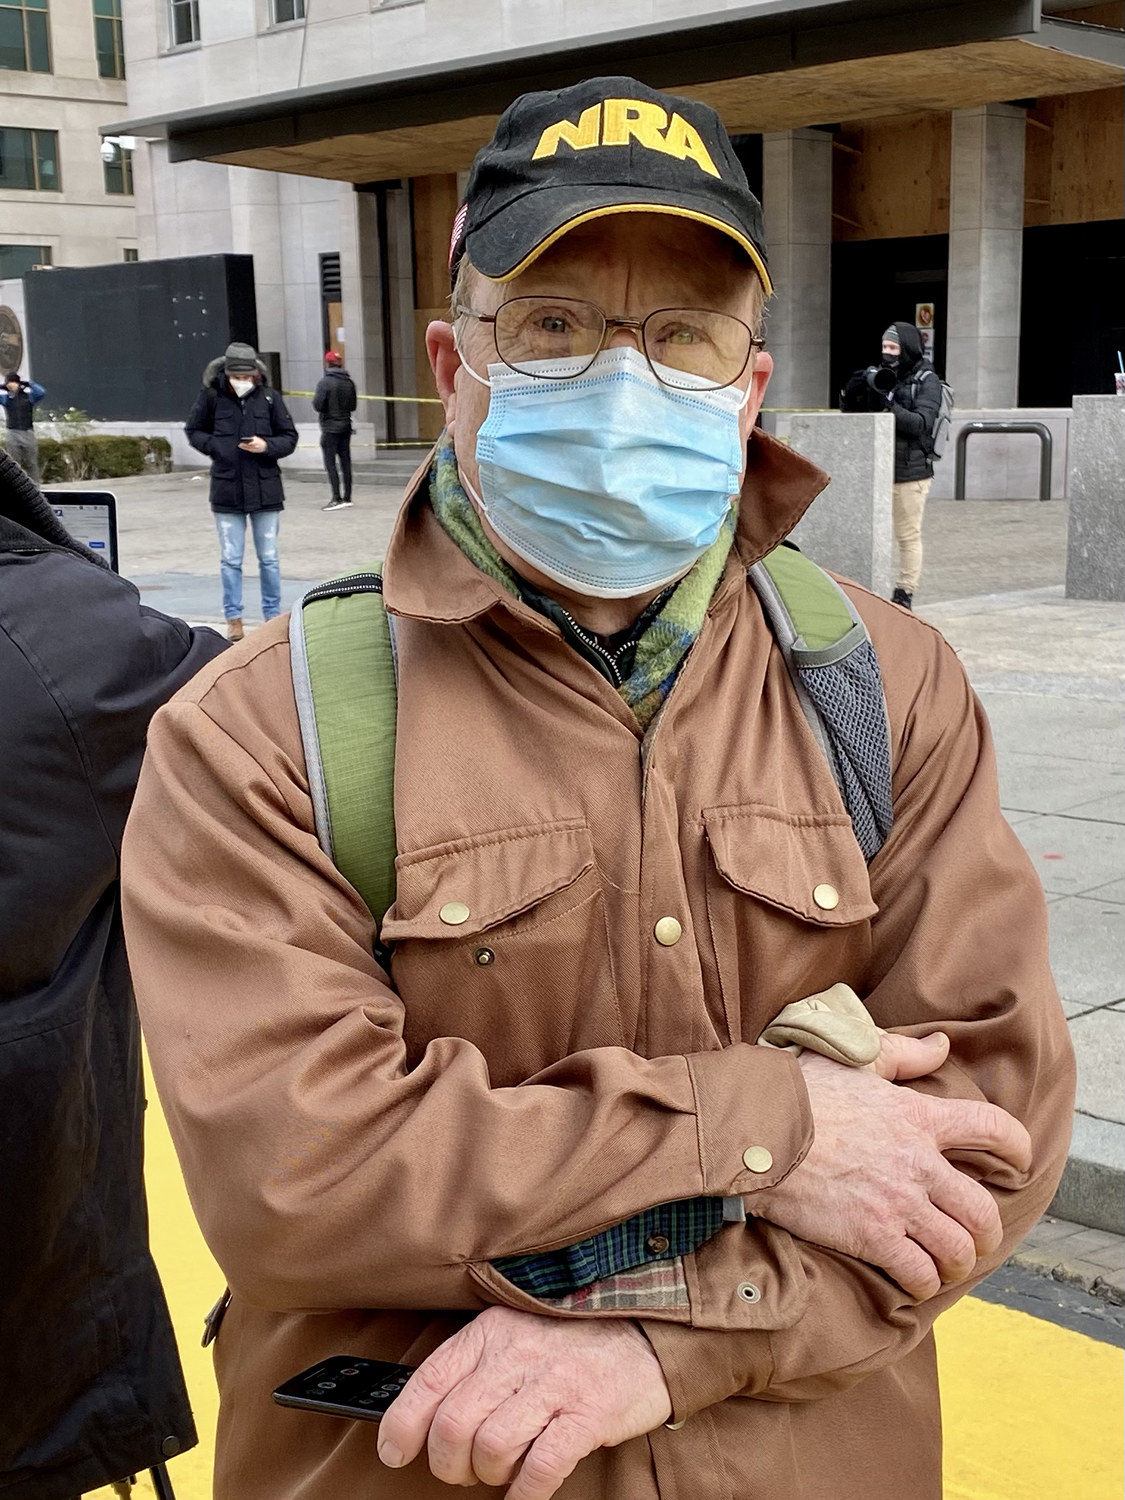 A man in an NRA hat and a mask